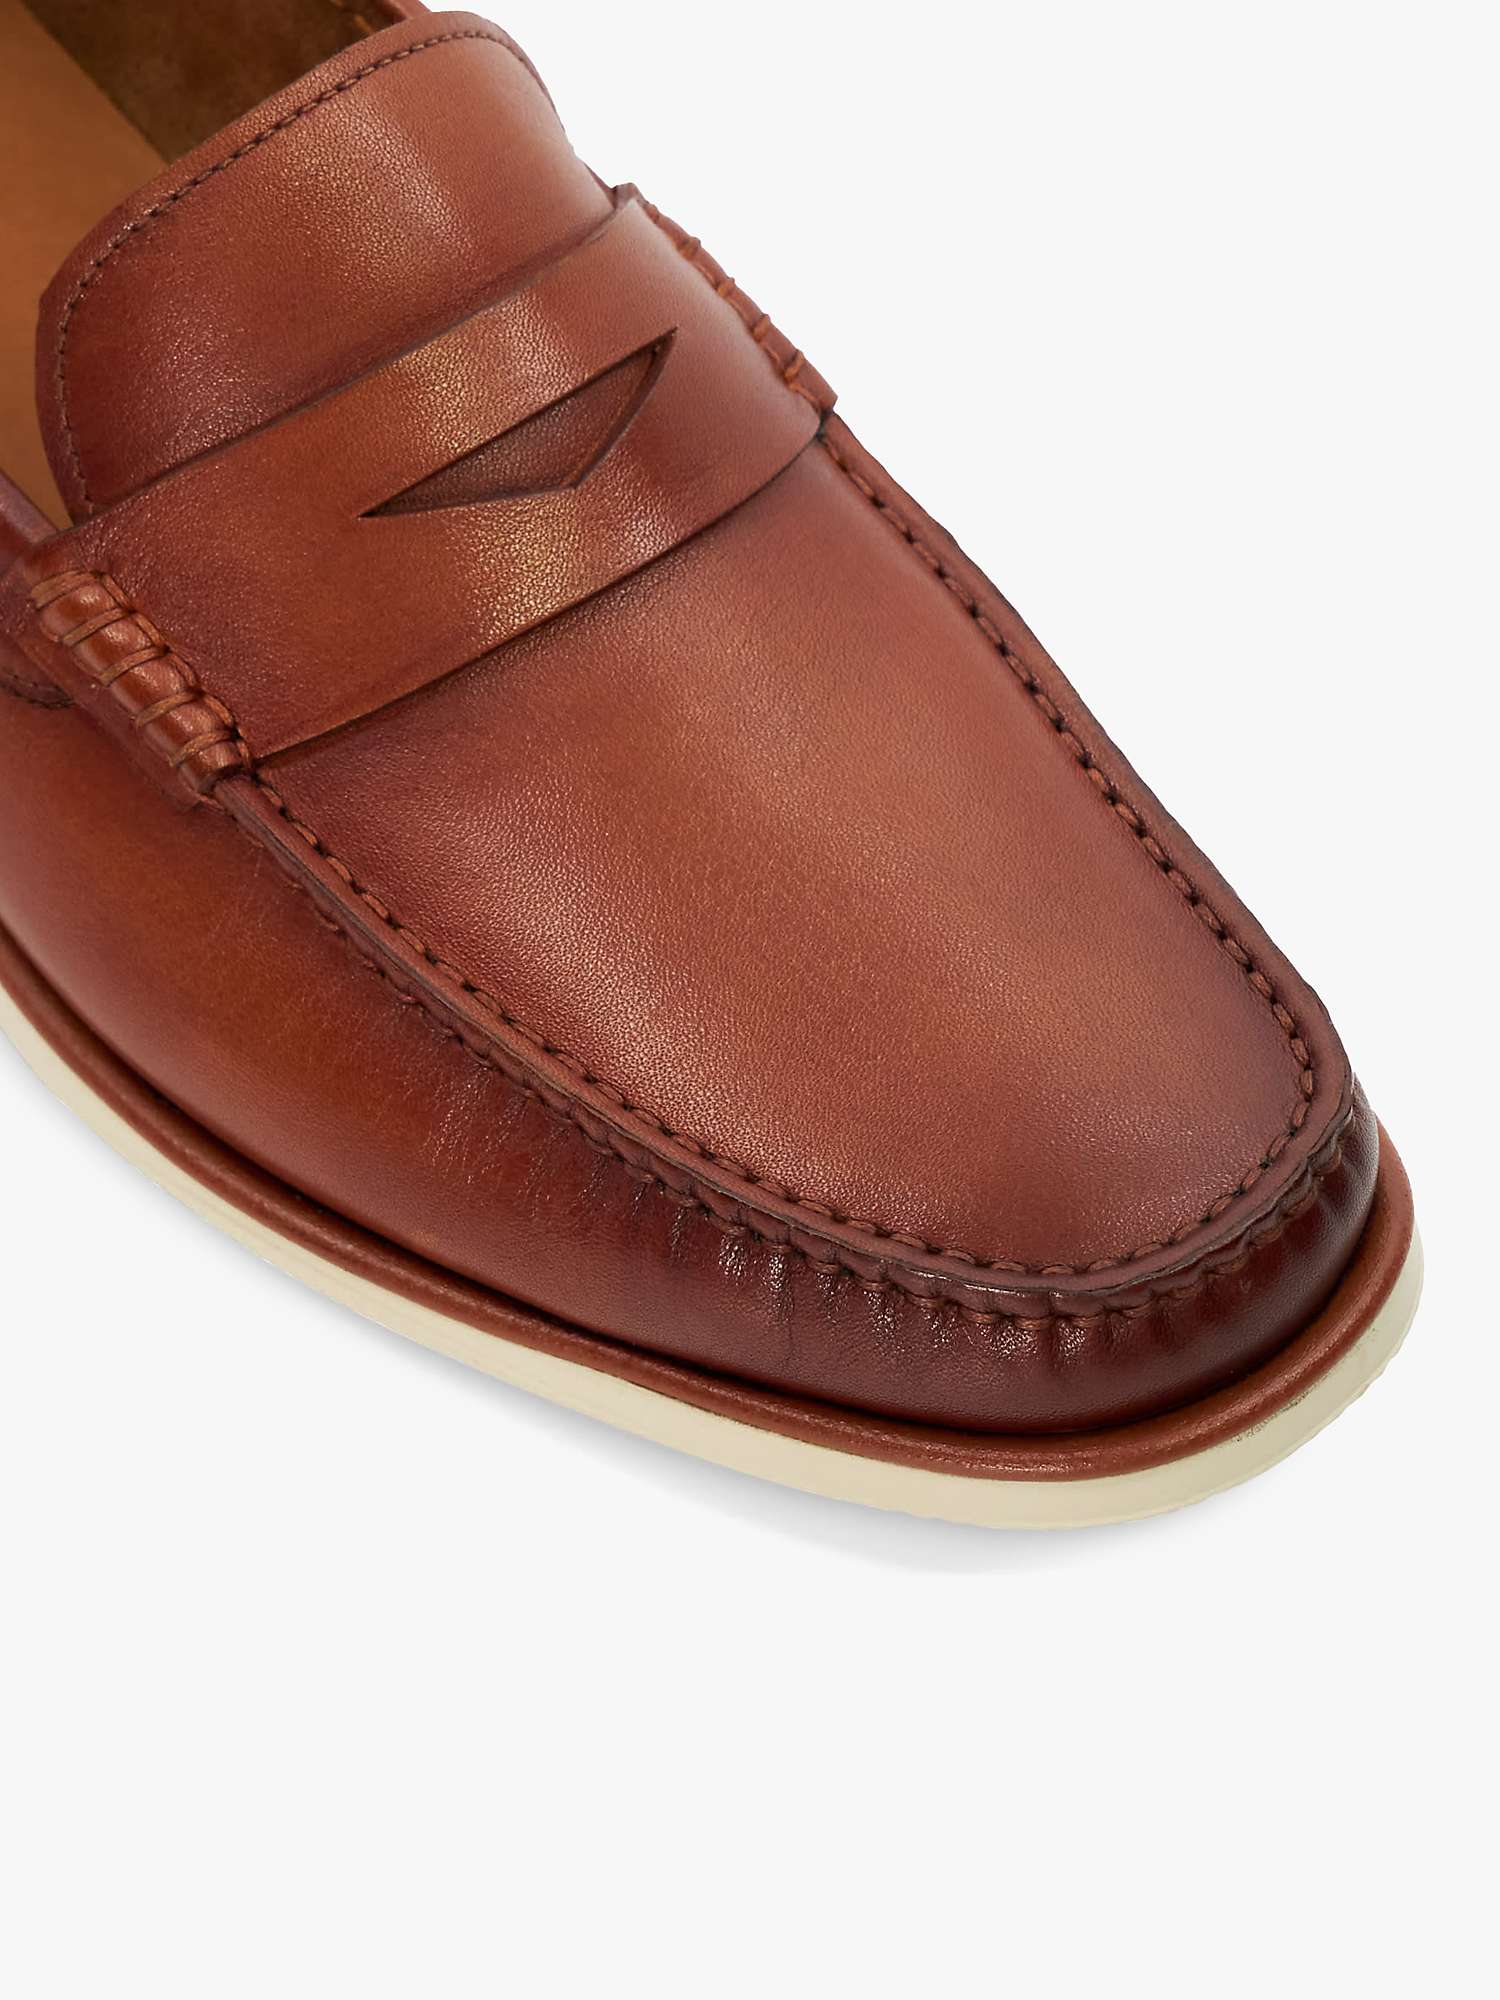 Buy Dune Berkly Leather Loafers, Brown Online at johnlewis.com